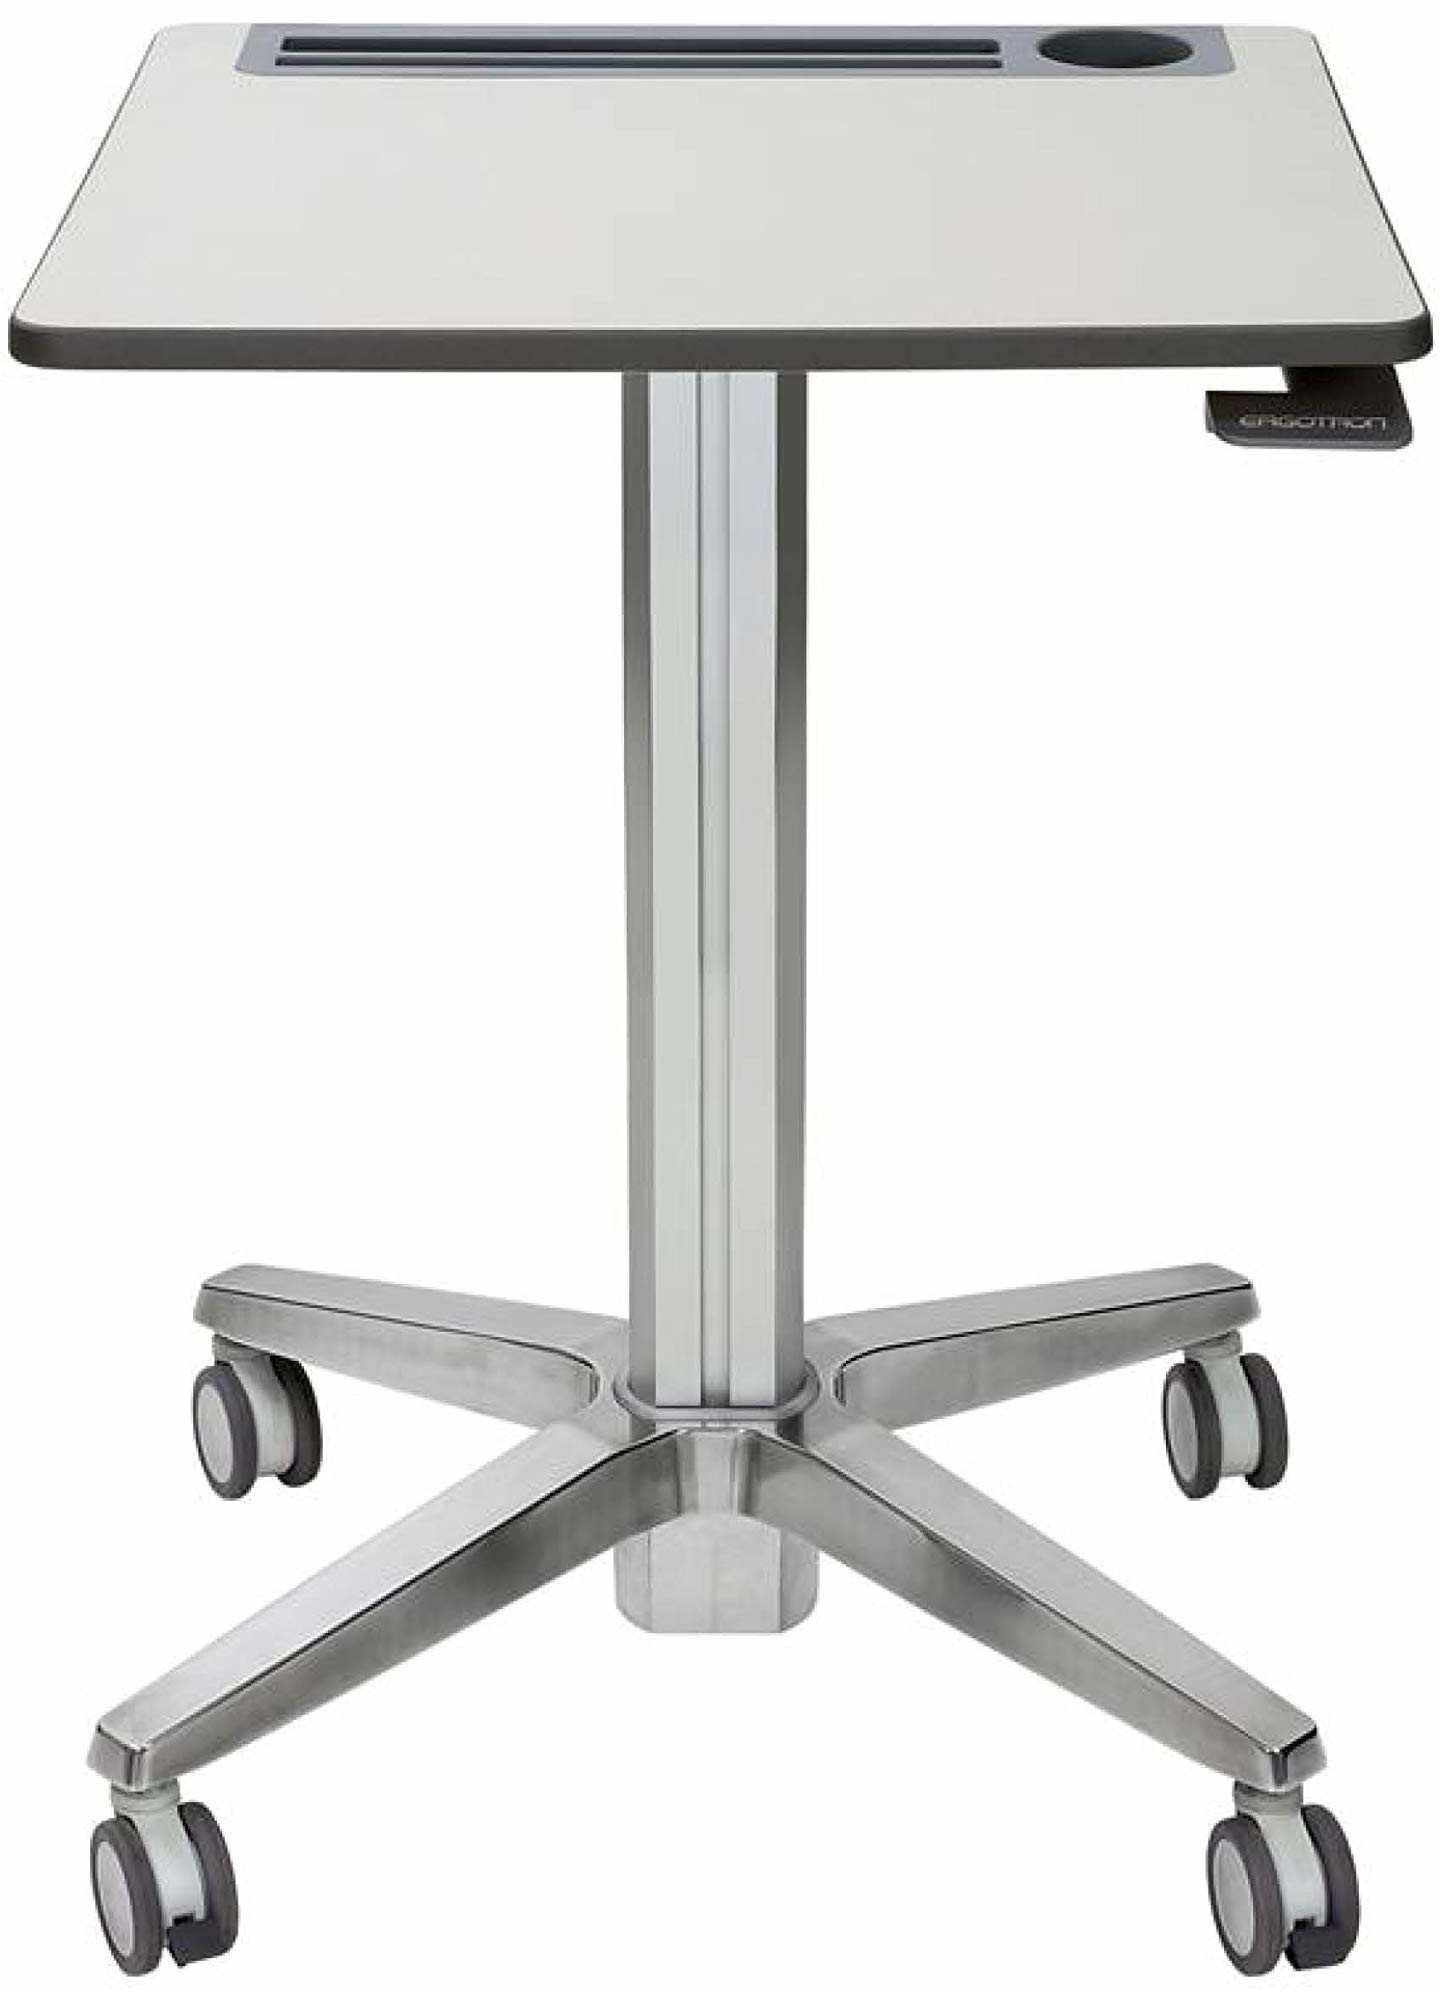 Ergotron 24-547-003 LearnFit Sit-Stand Desk for Students 6 years and over